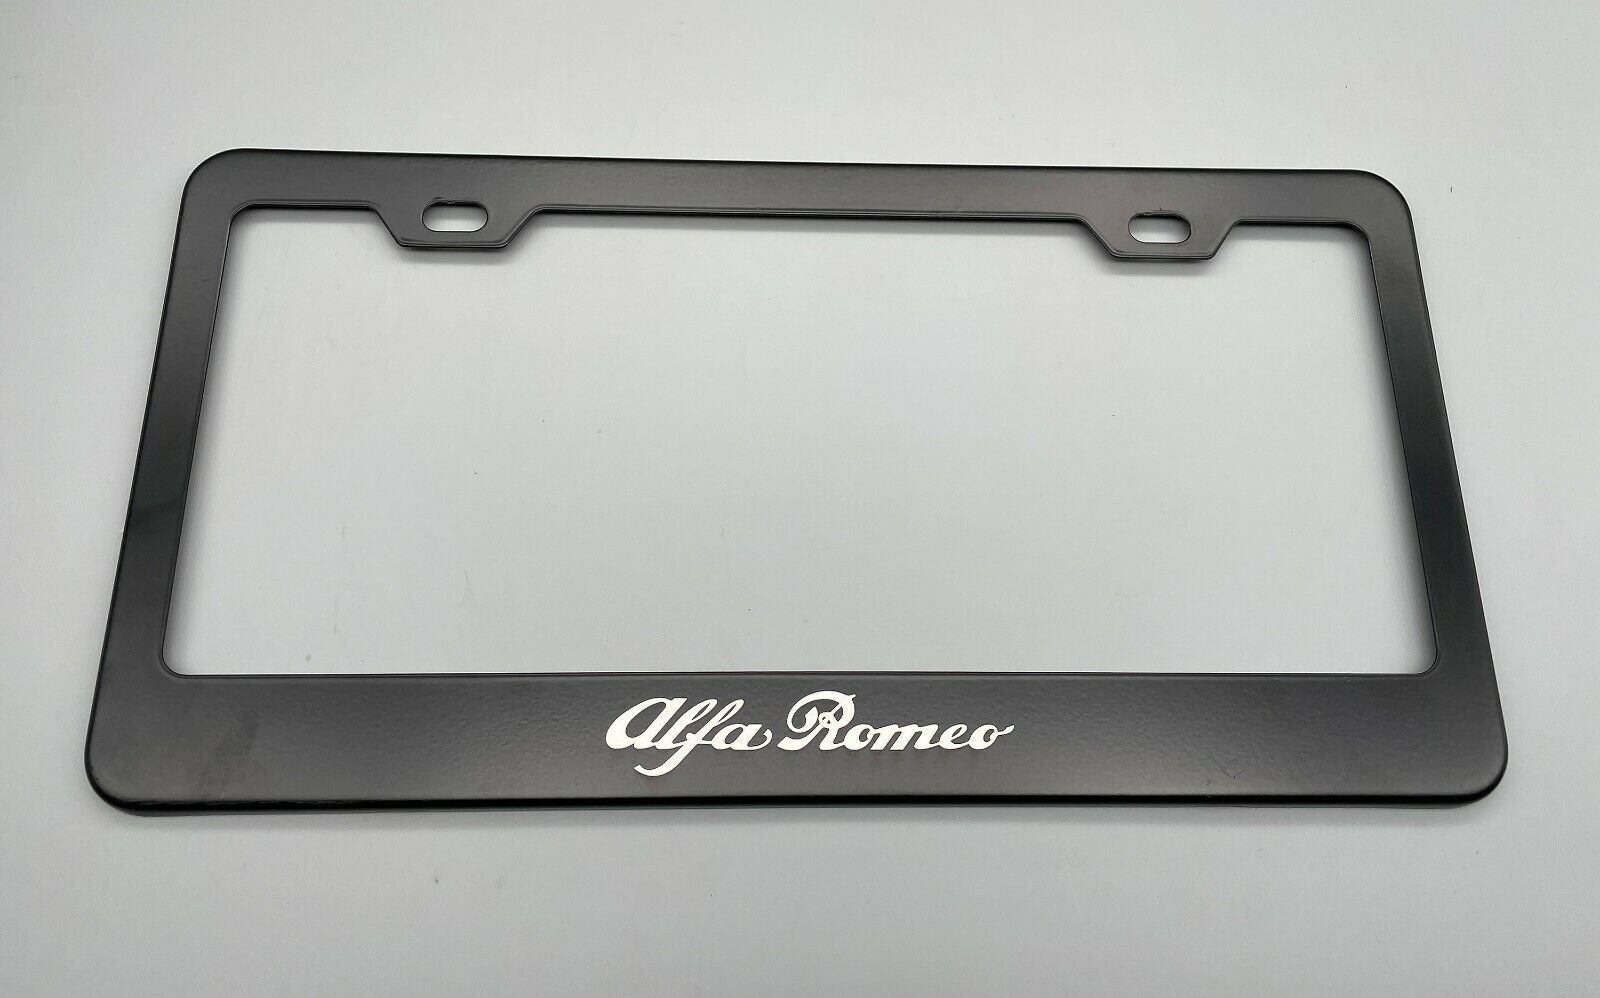 Alfa Romeo Black License Plate Frame Stainless Steel with Laser Engraved